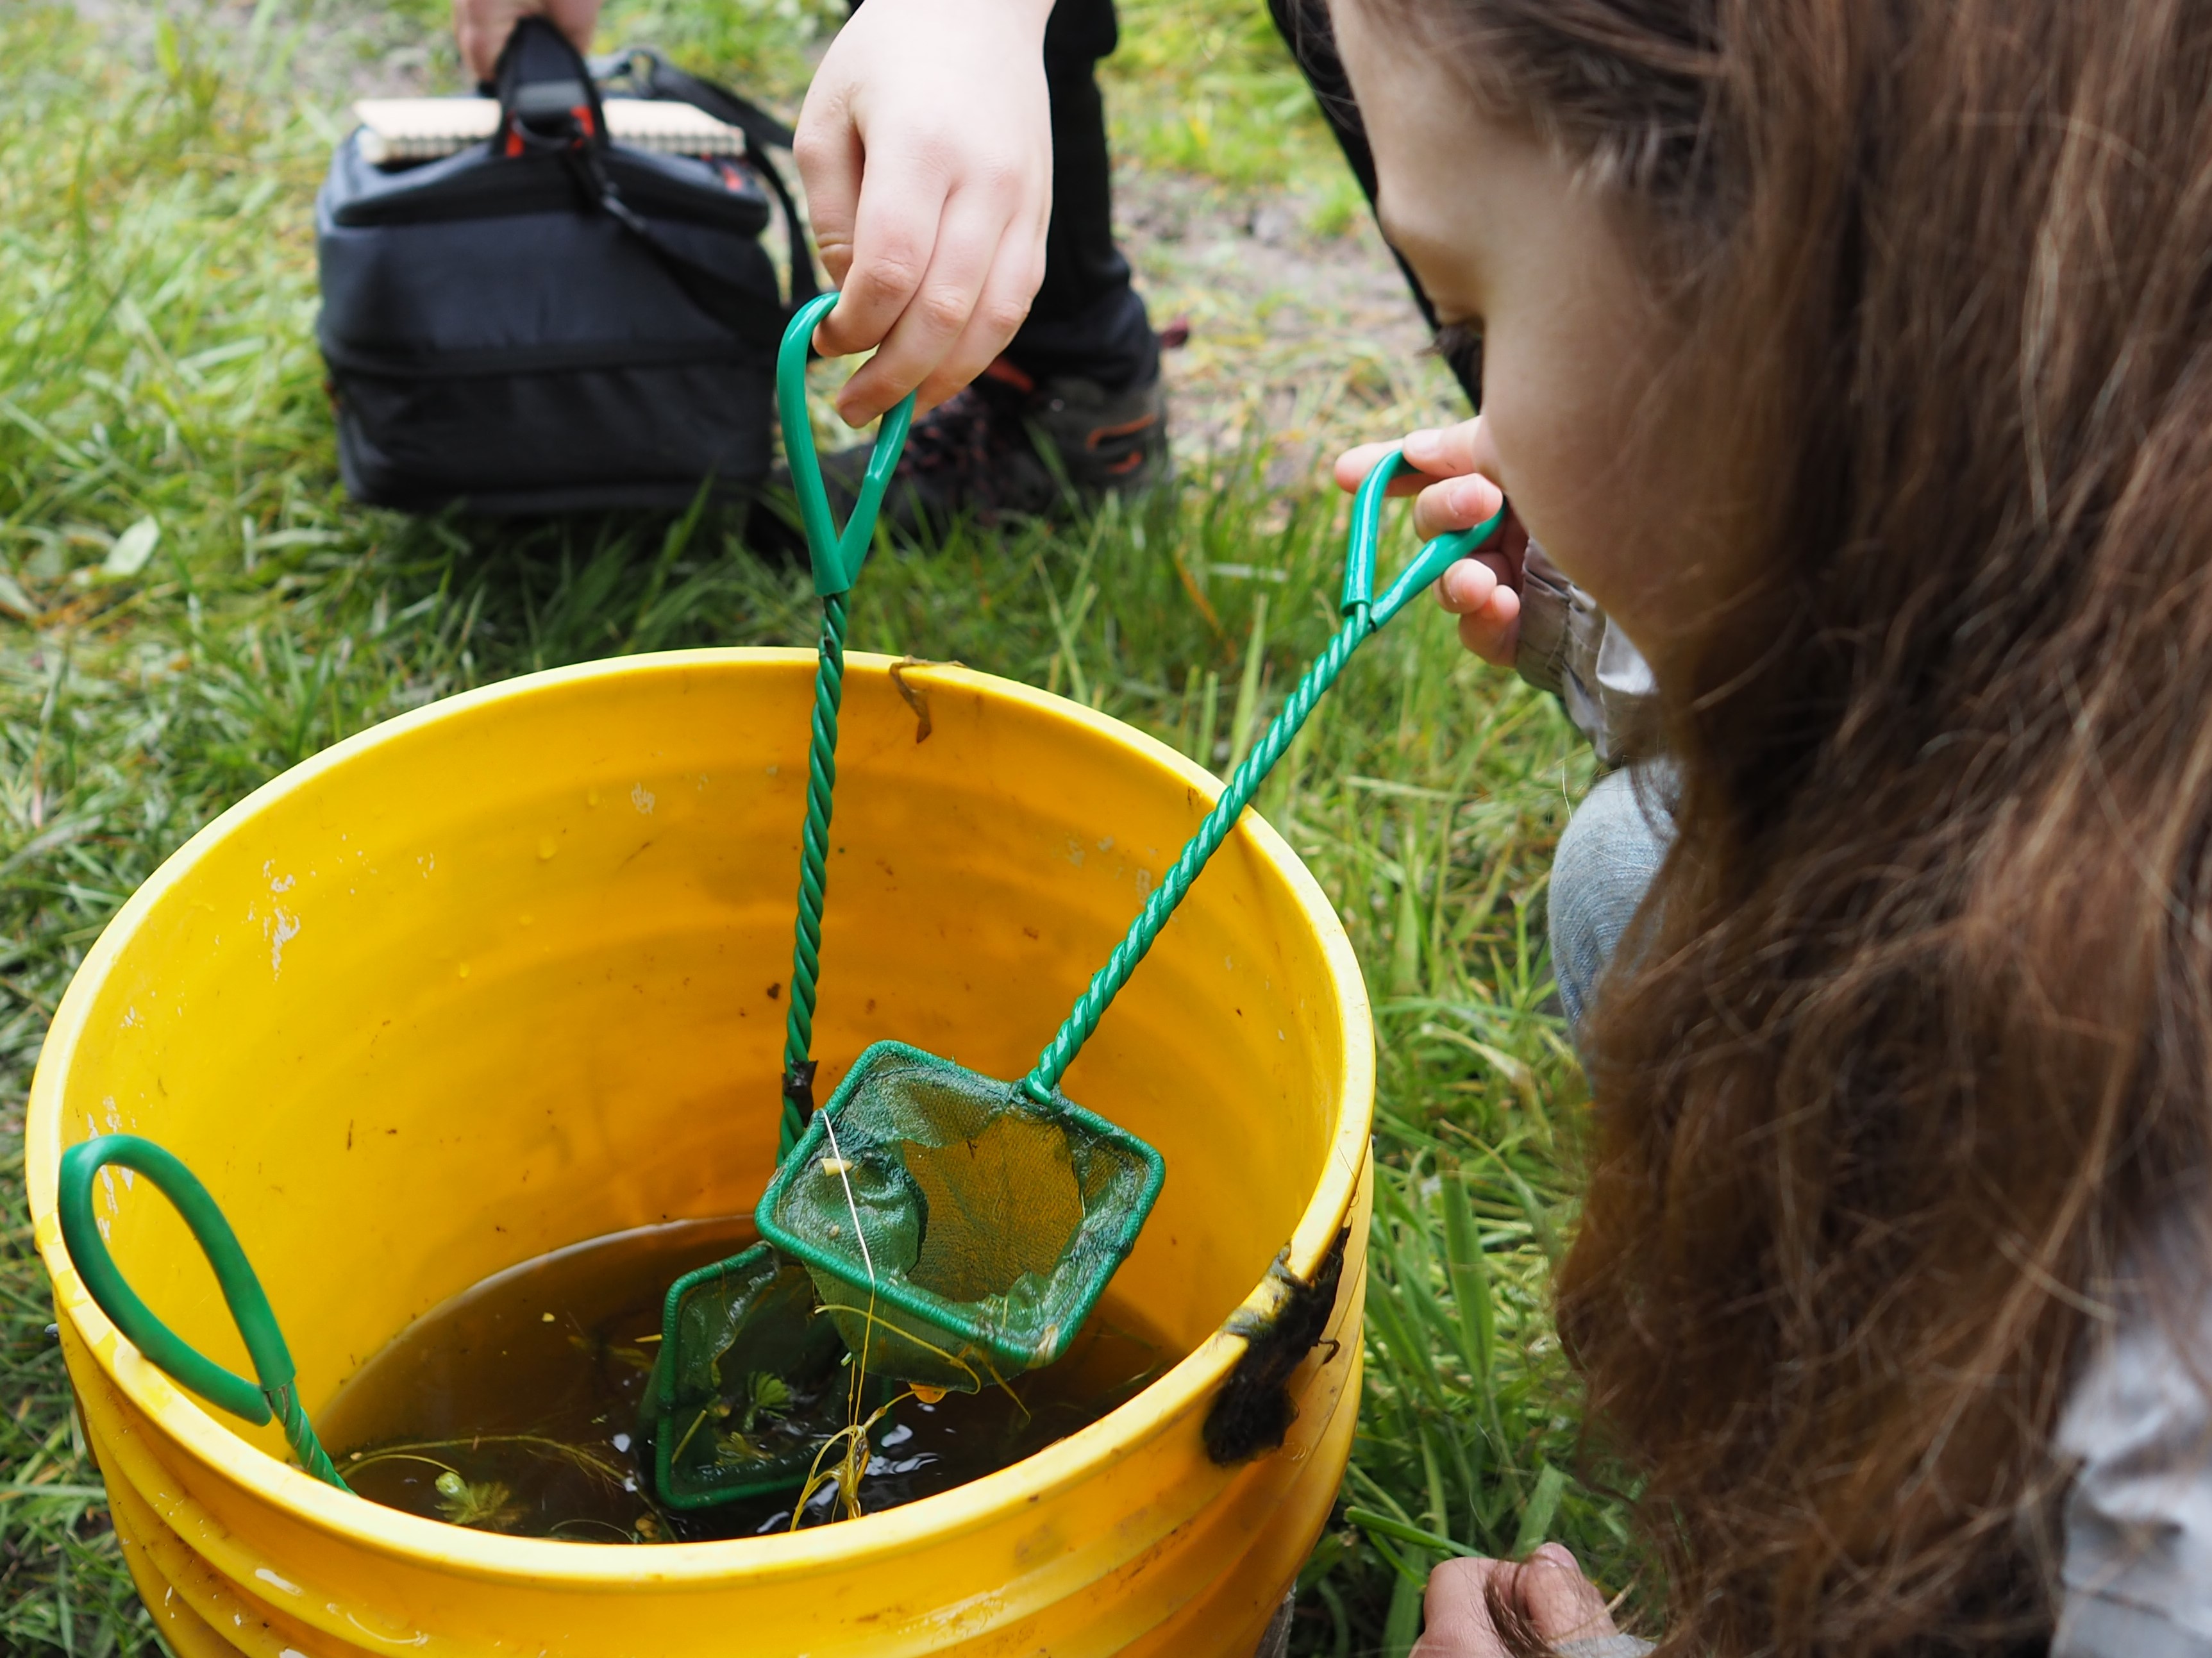 A young student holds a small net over a bucket, observing plants and wildlife.